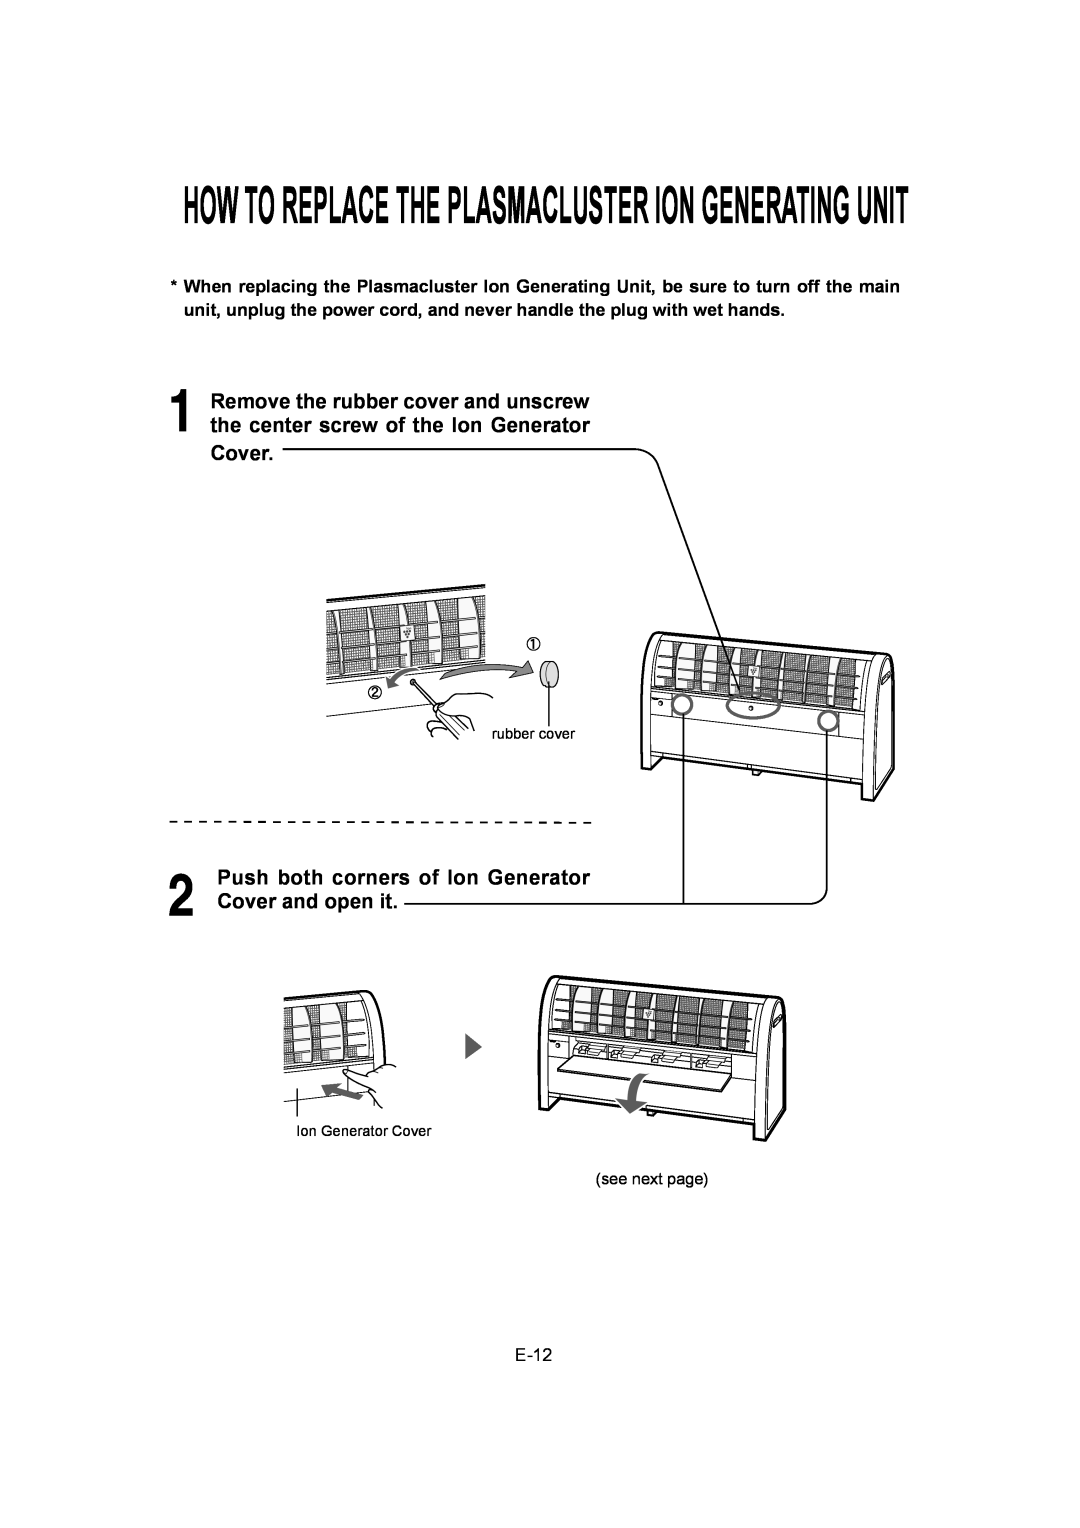 Sharp IG-A40U operation manual Push both corners of Ion Generator, Cover and open it, E-12 